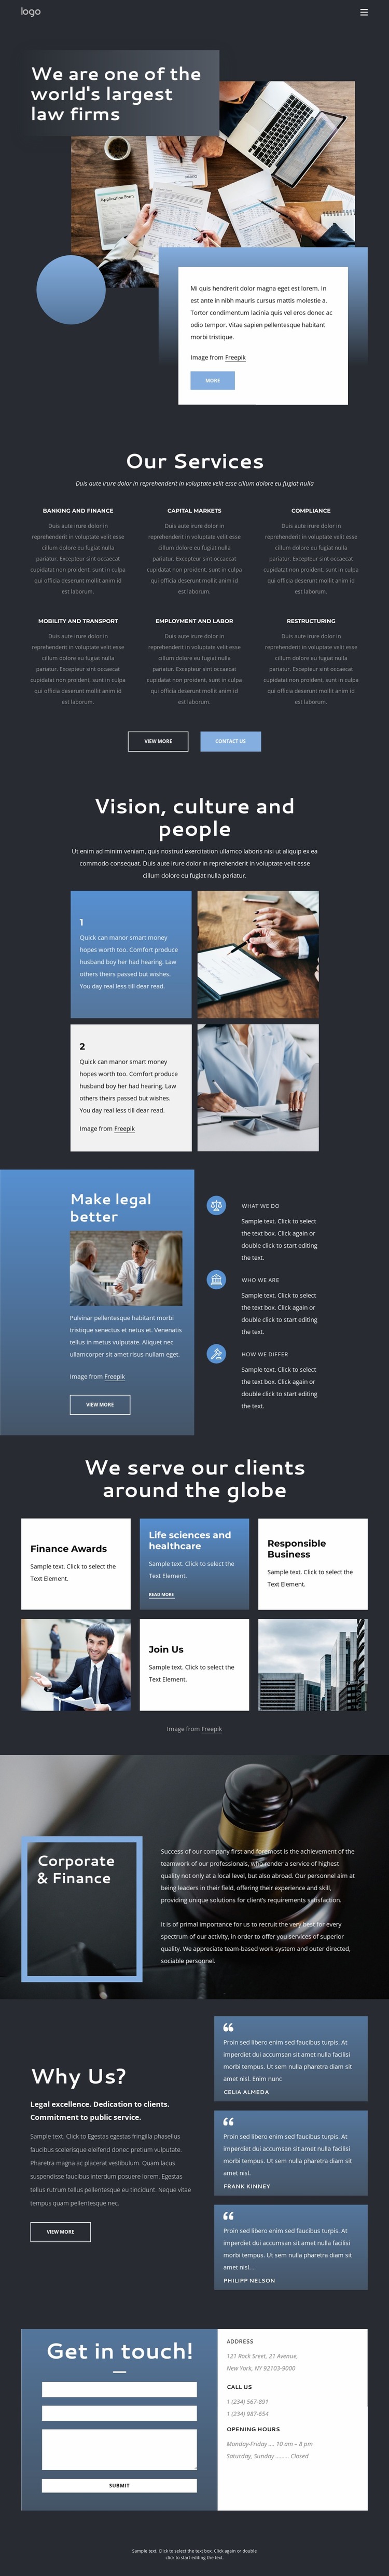 We are an elite law firm Website Mockup